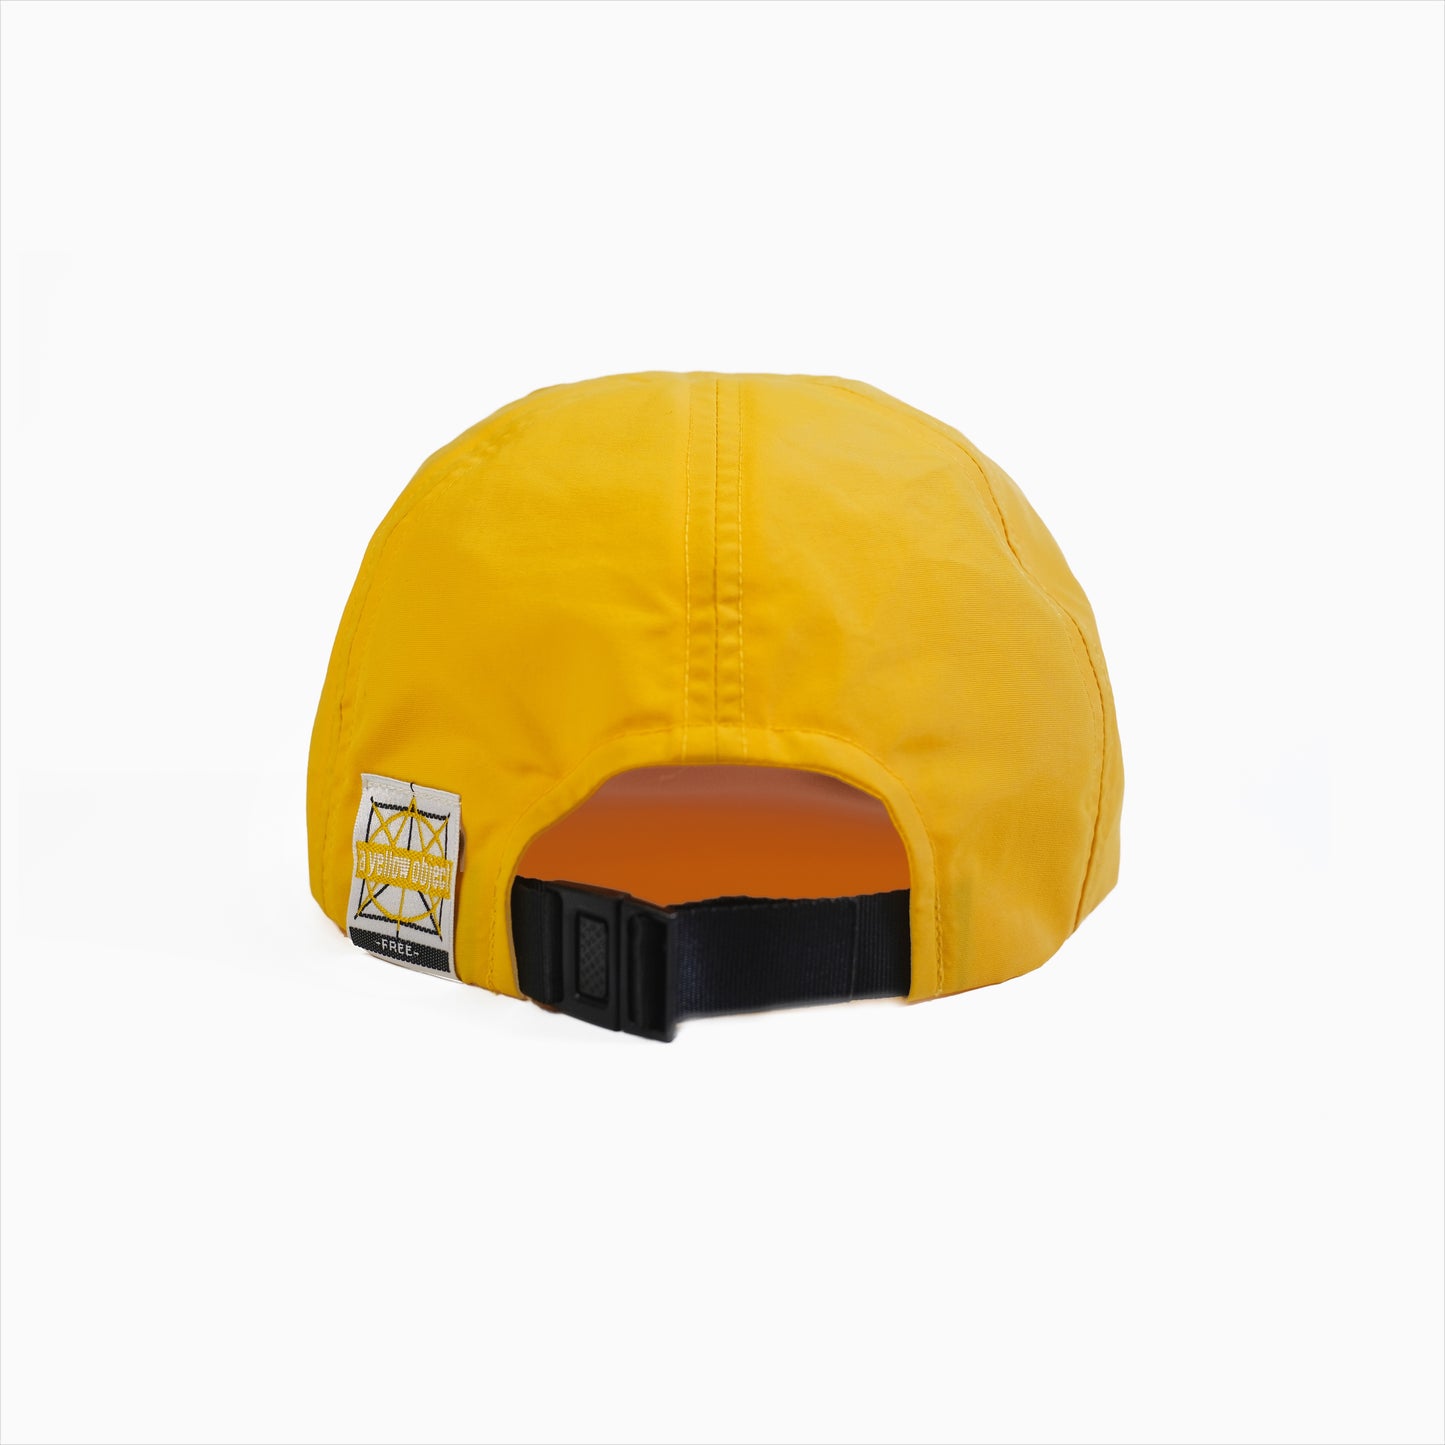 Just A Cap (Yellow) - A Yellow Object